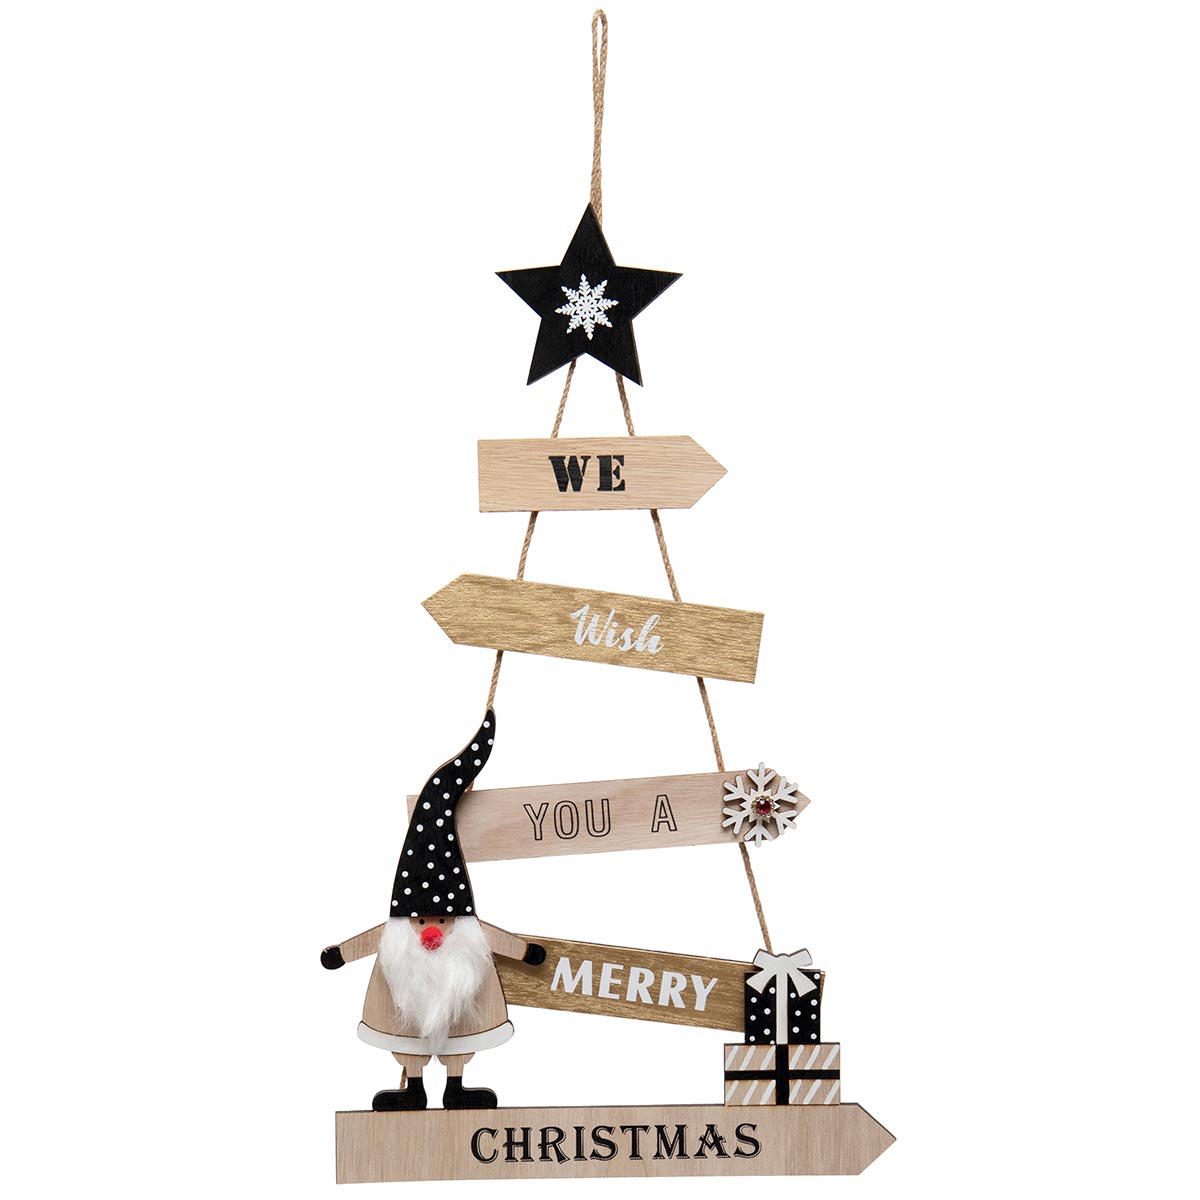 We Wish You a Merry Christmas Gnome Wood Hanging Sign Black/Whi